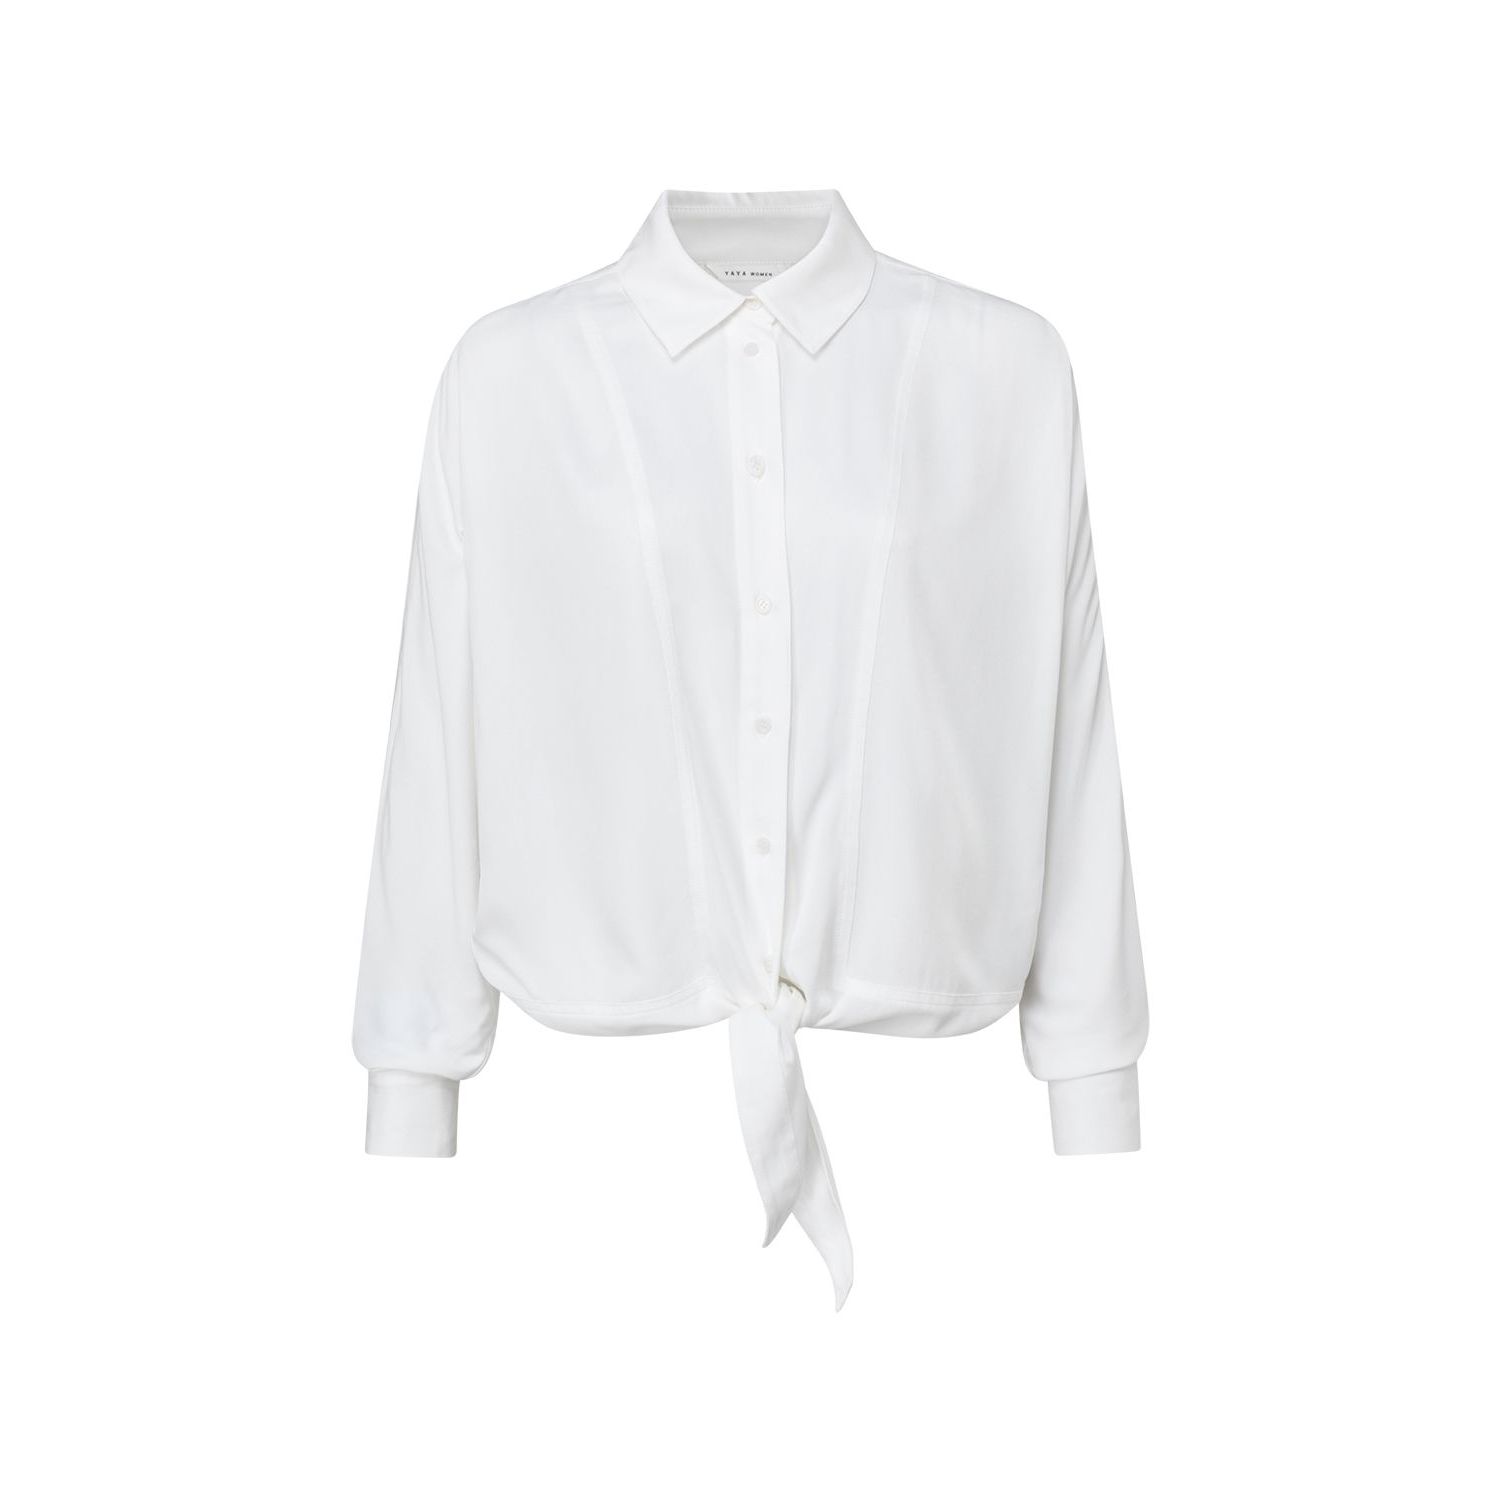 Yaya boxy button up blouse with tie off white